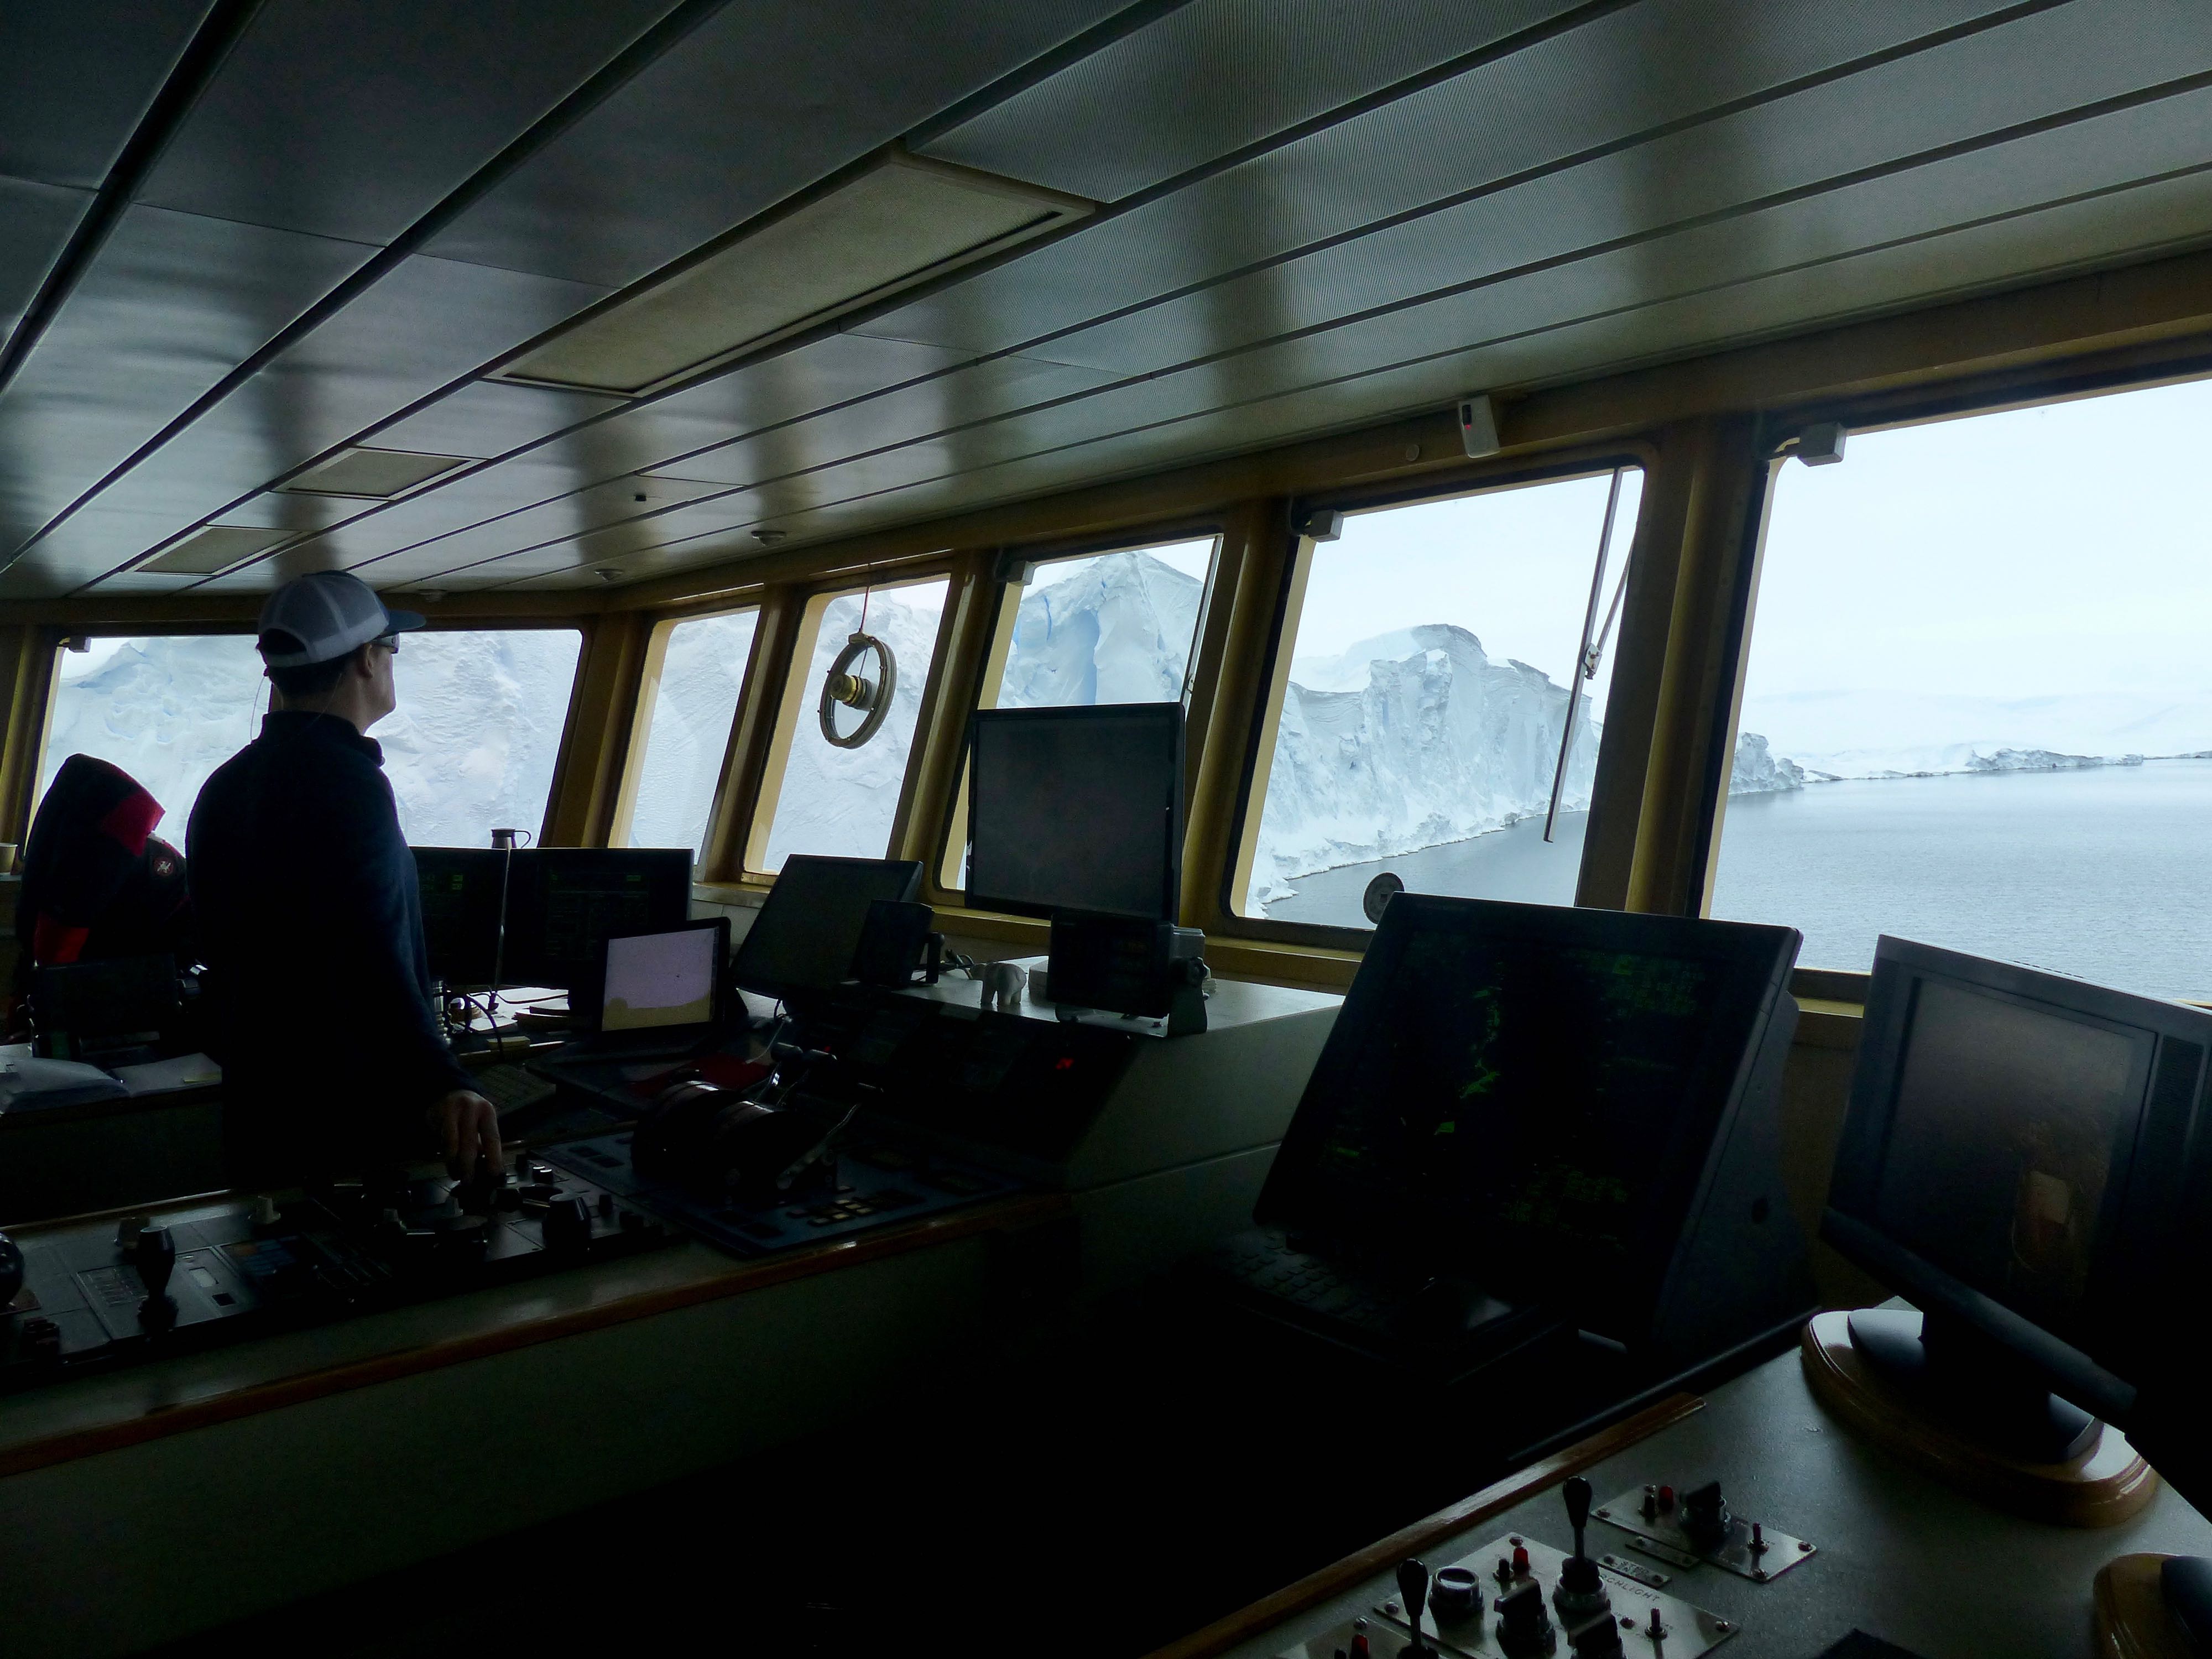 On the bridge of the ship, Luke Zeller, the third mate onboard the Palmer, navigates the ship a few hundred meters from the Thwaites ice front. As directed by the THOR's multibeam experts, he manuevers the ship so that the multibeam can map along the entire Thwaites ice front and as much as a kilometer underneath. Photo credit: Tasha Snow